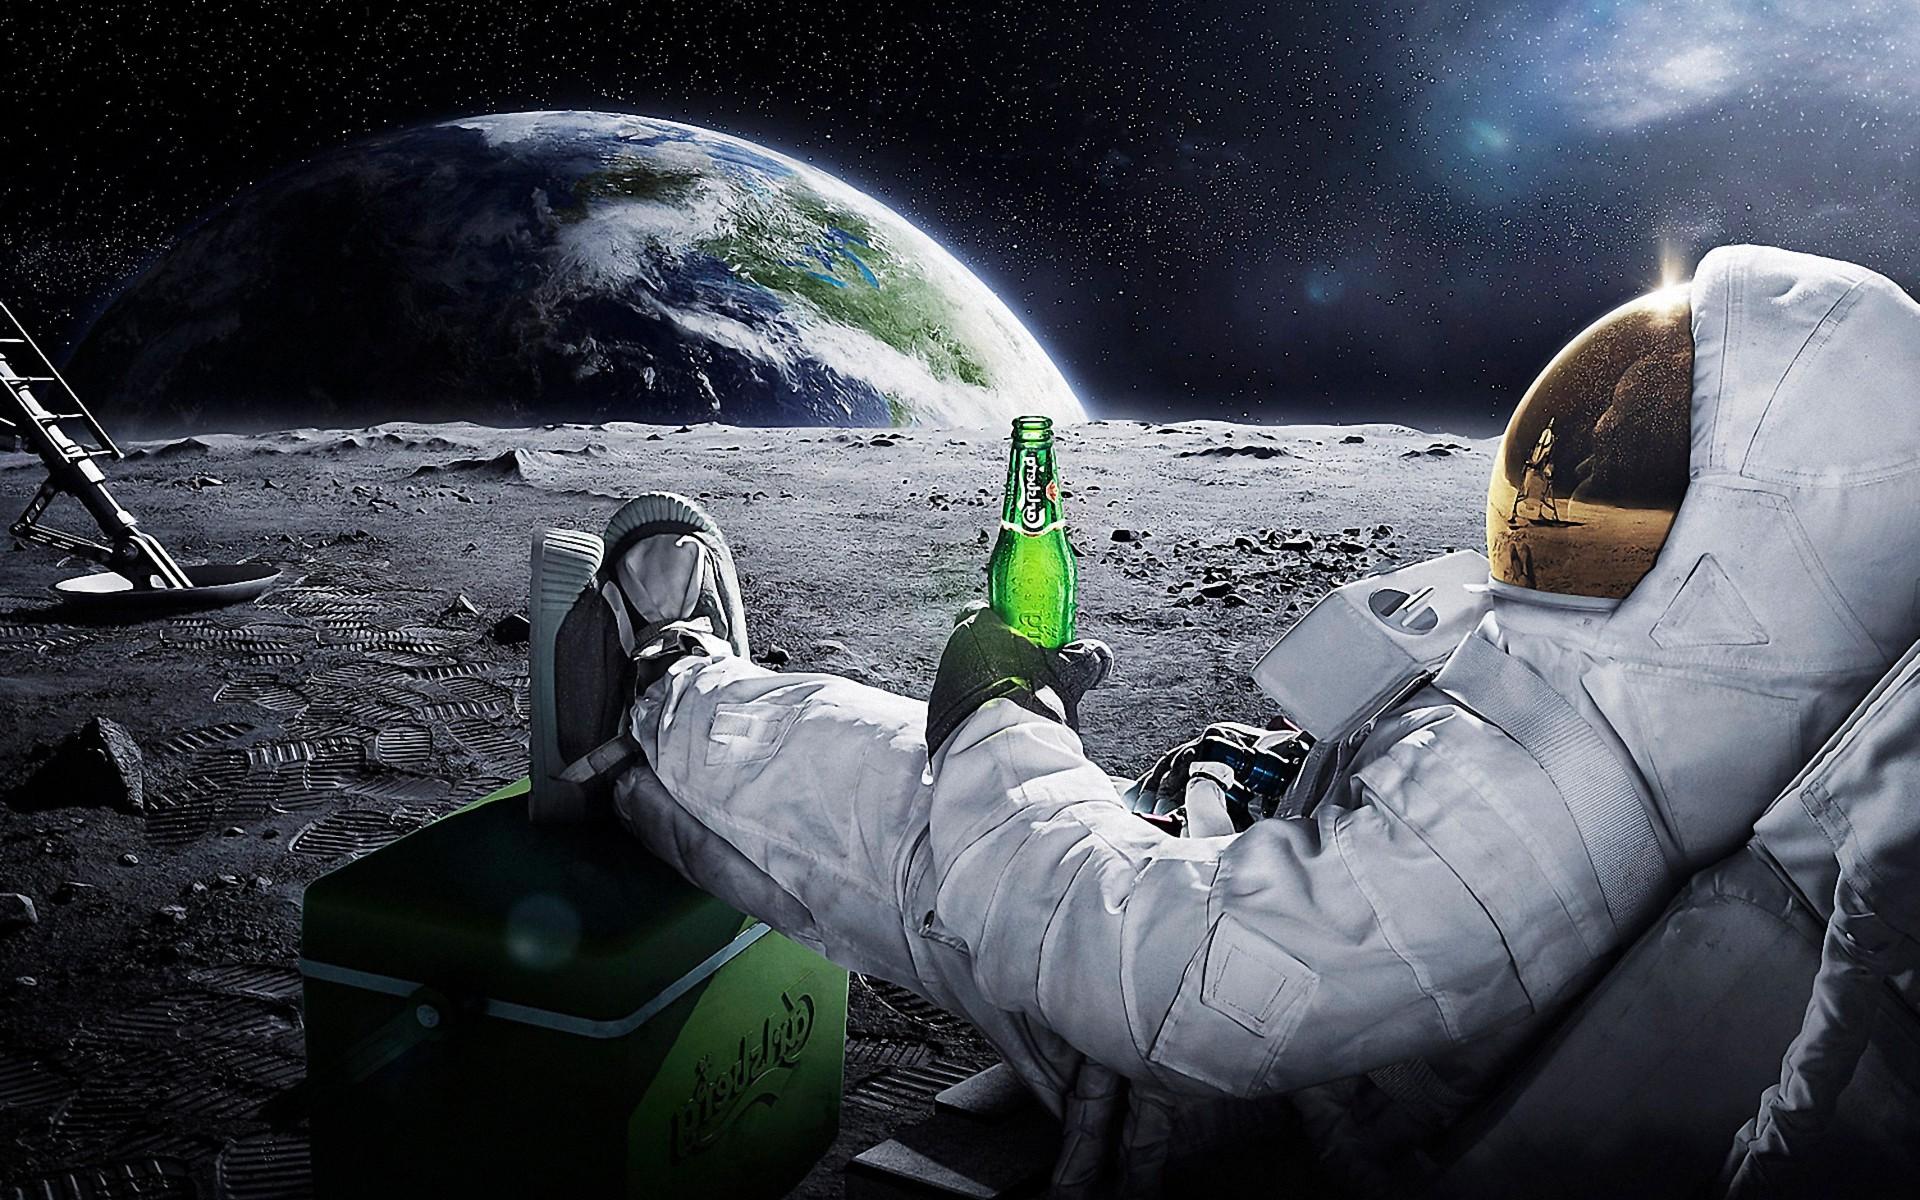 Download hd wallpapers of Astronauts Drinking on Moon Free download